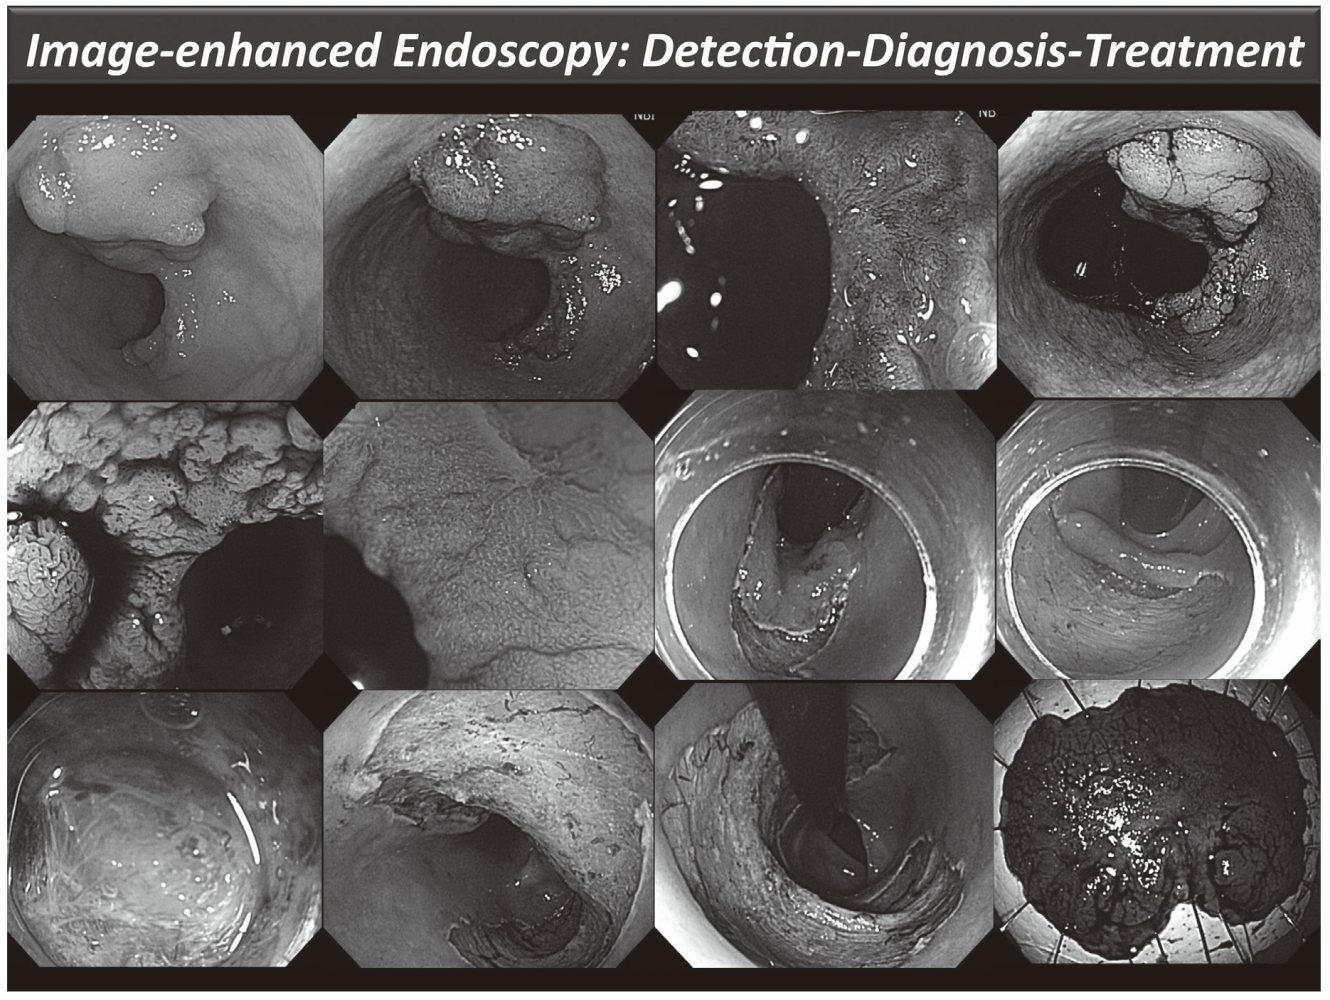 Figure 1. Endoscopic diagnosis using image-enhanced endoscopy (high-resolution endoscopy, narrow-band imaging and chromoscopy) and endoscopic submucosal dissection (ESD) procedure for treating early colon cancer(Full Size)